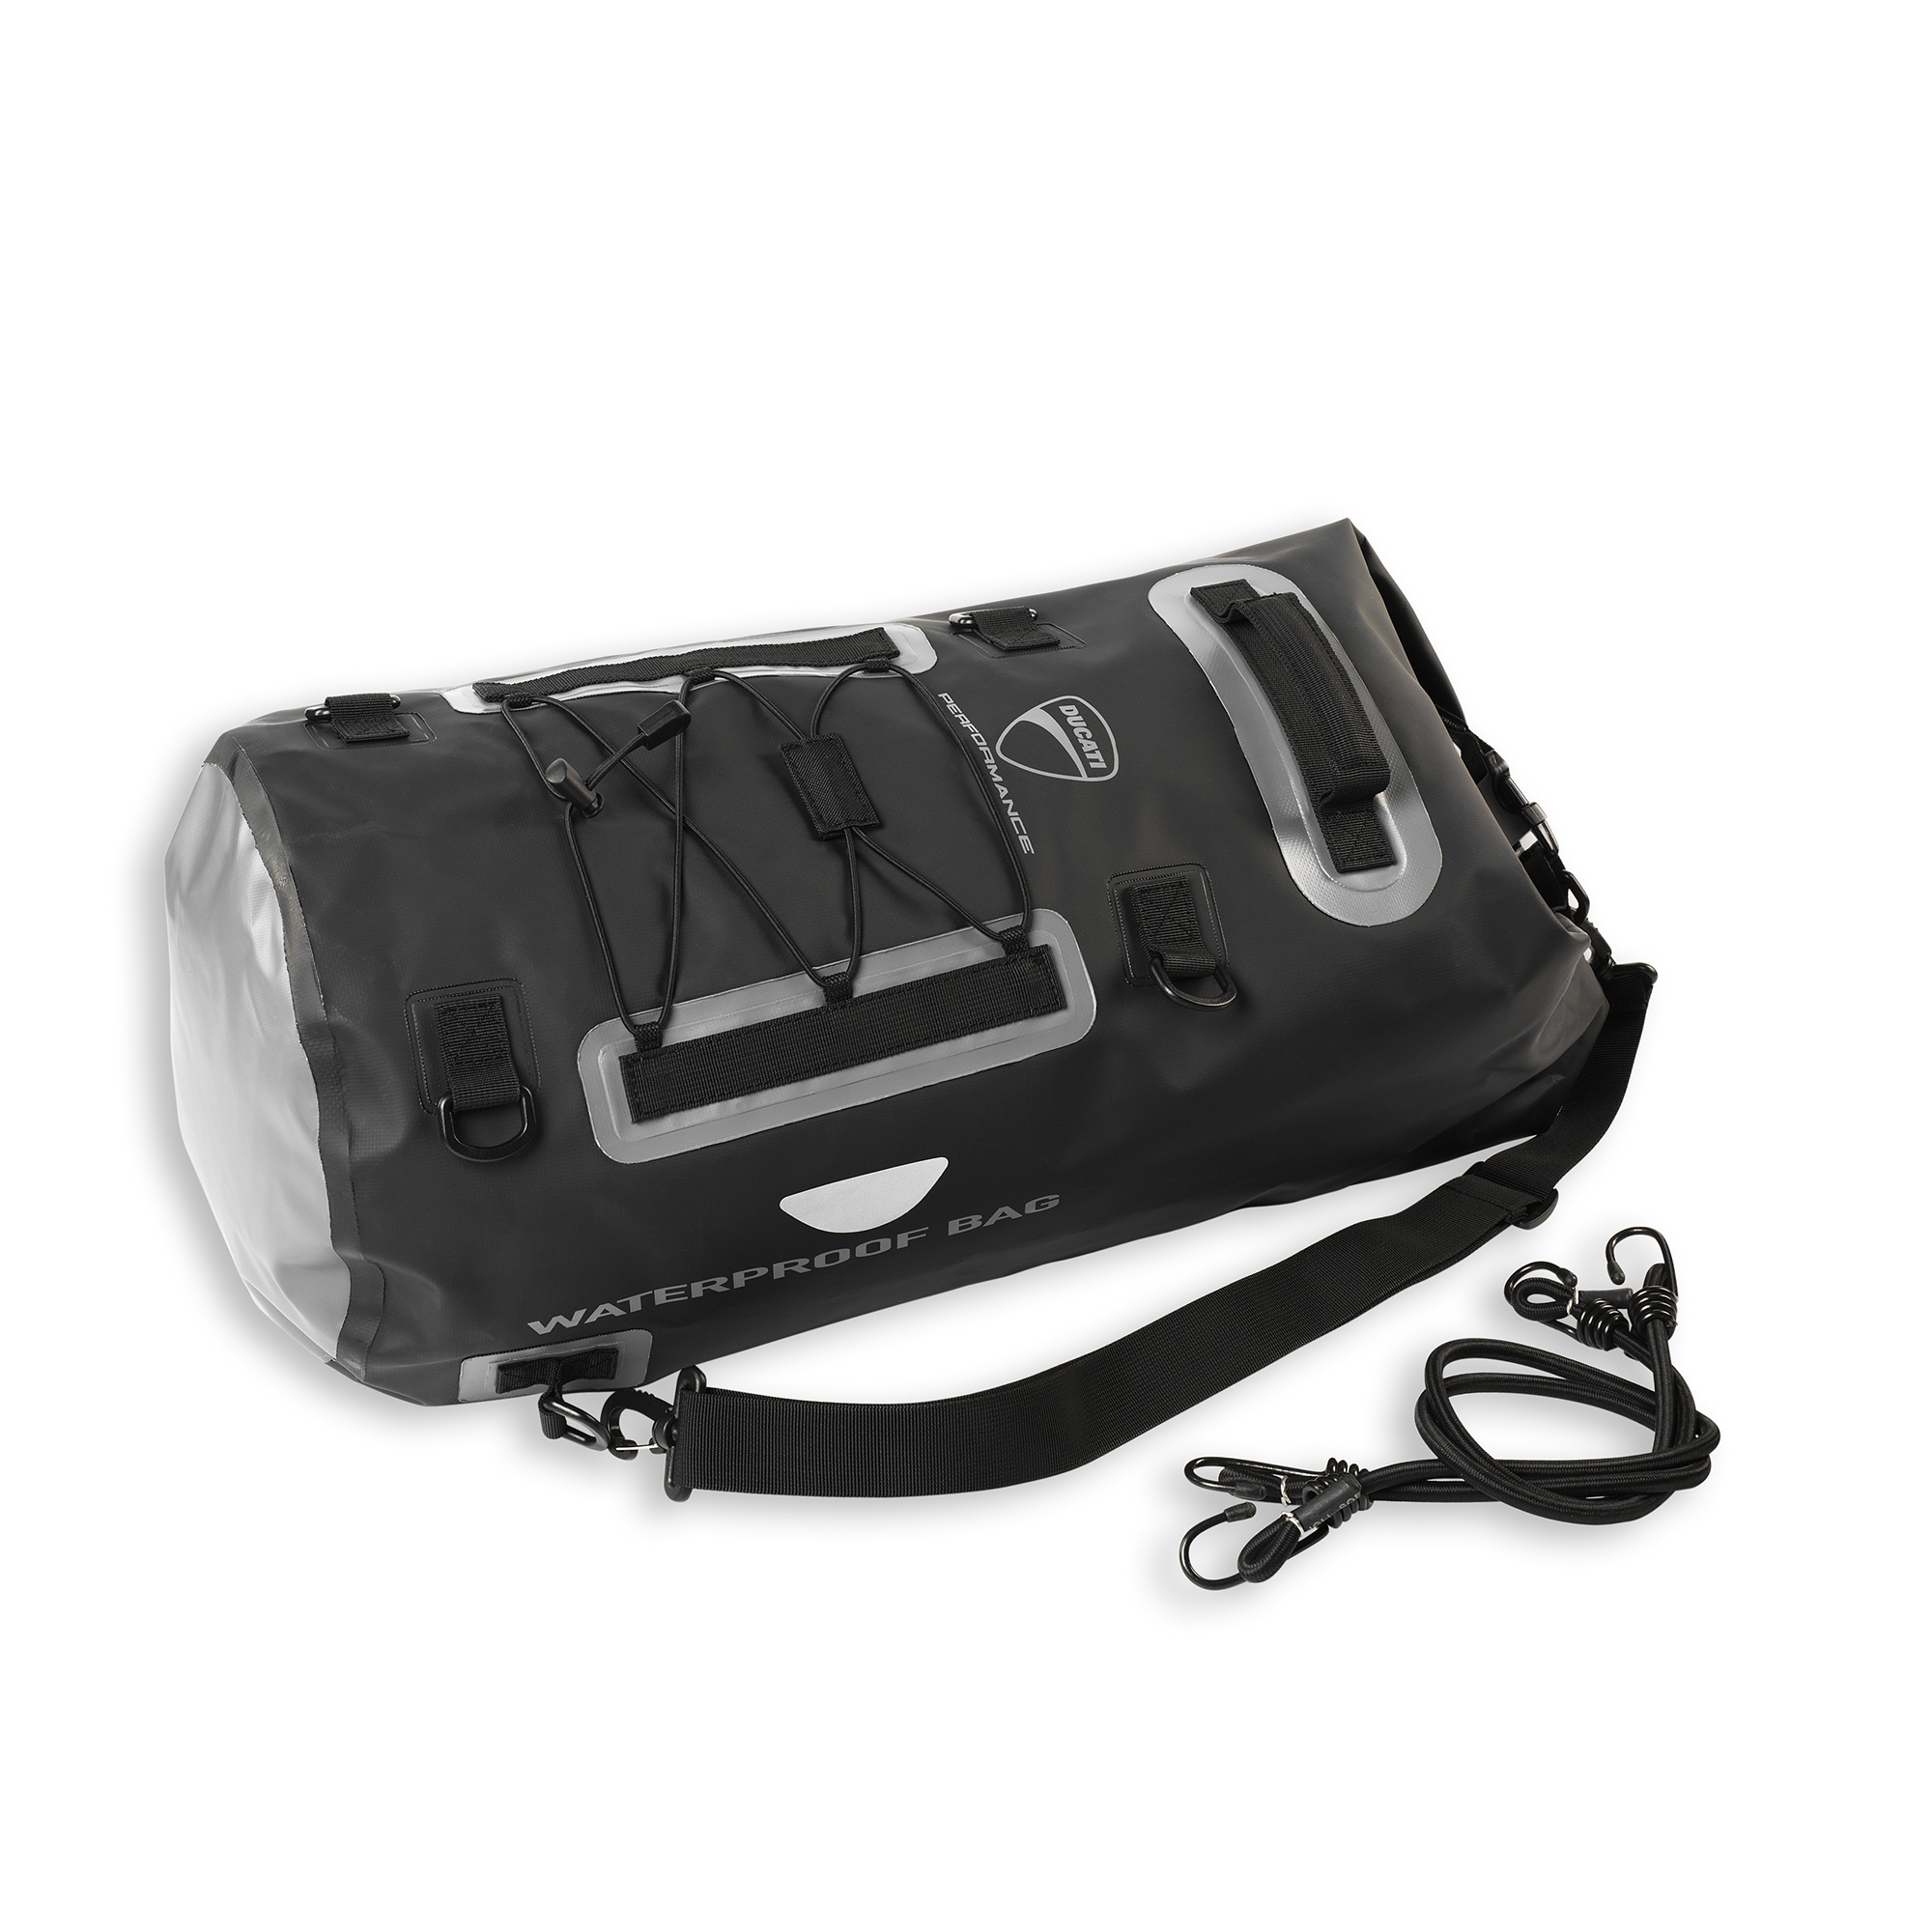 Rear bag for passenger seat or luggage rack.